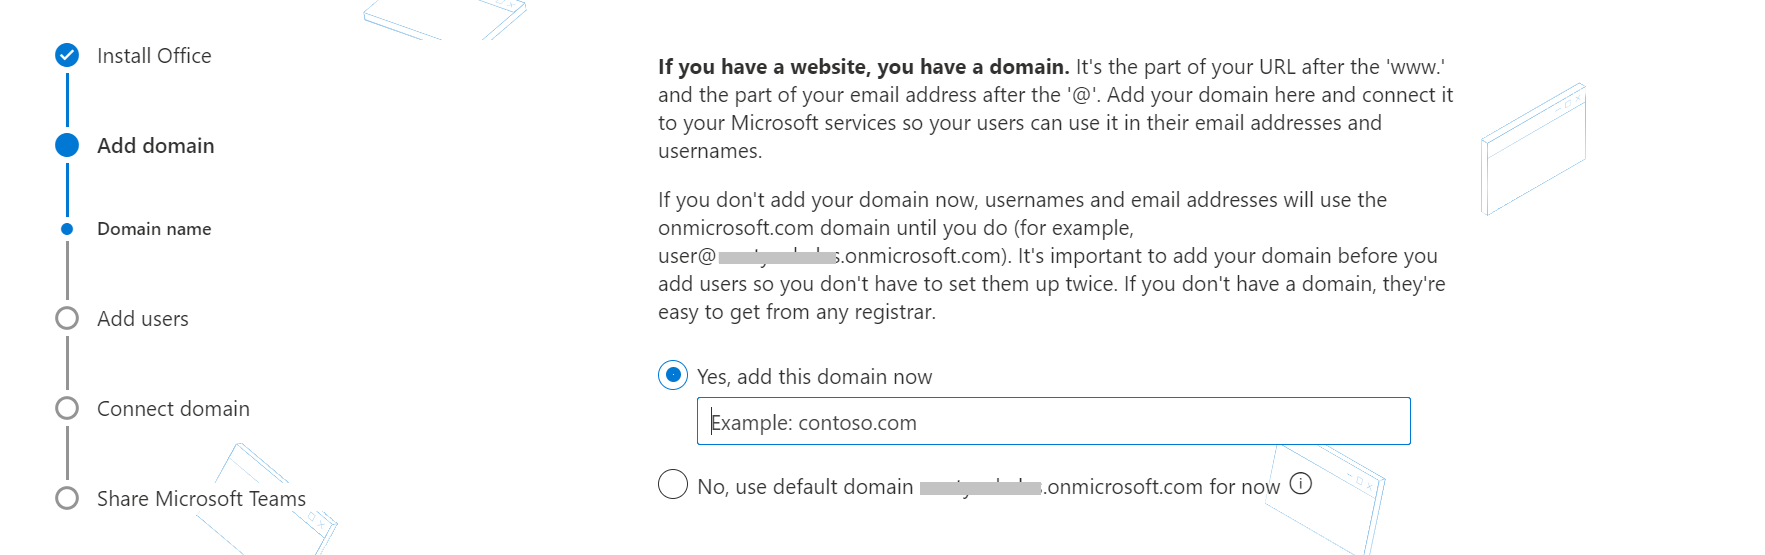 Set up a custom email address by adding a domain to Office 365.